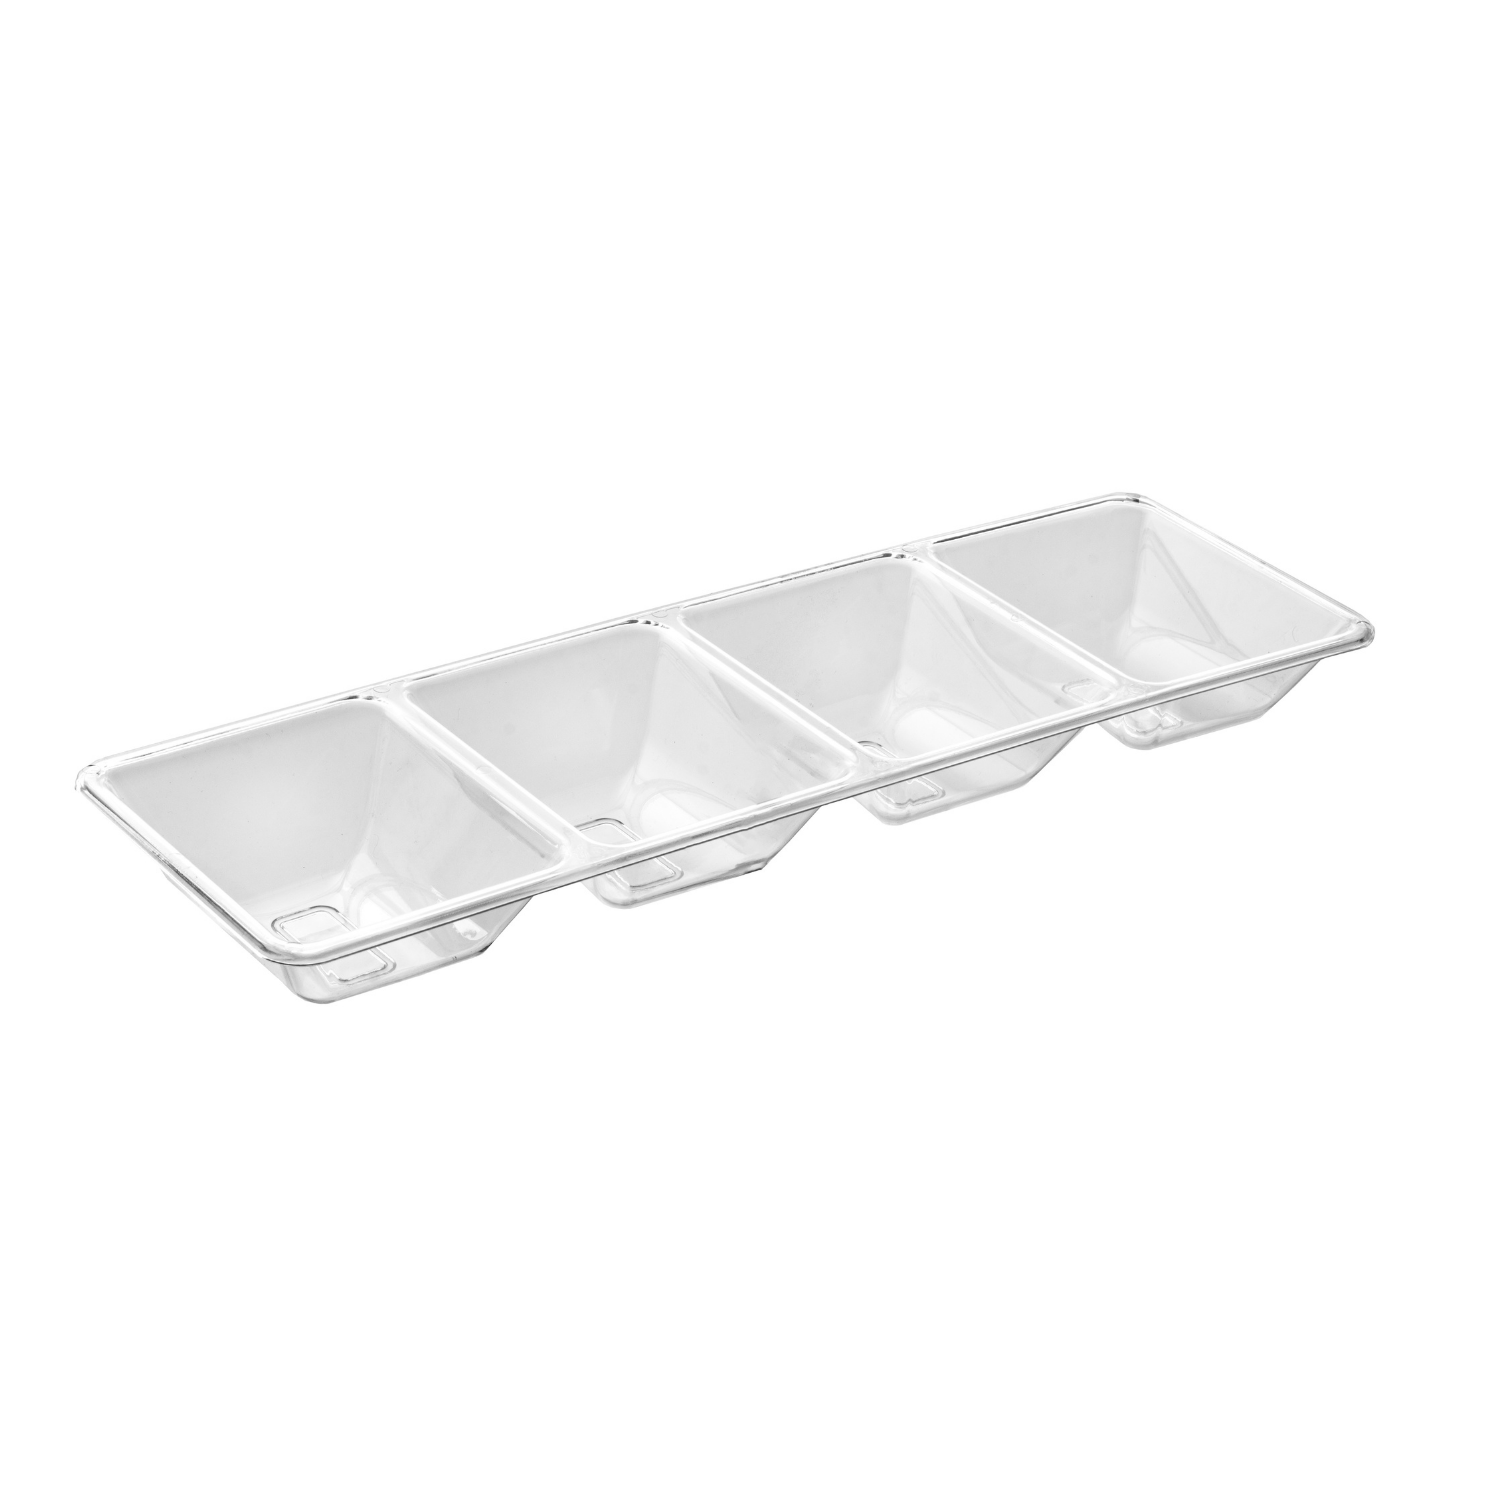 LARGE PLASTIC CUTLERY TRAY 6 COMPARTMENTS GLITTER RED TIDY ORGANISER KITCHEN 